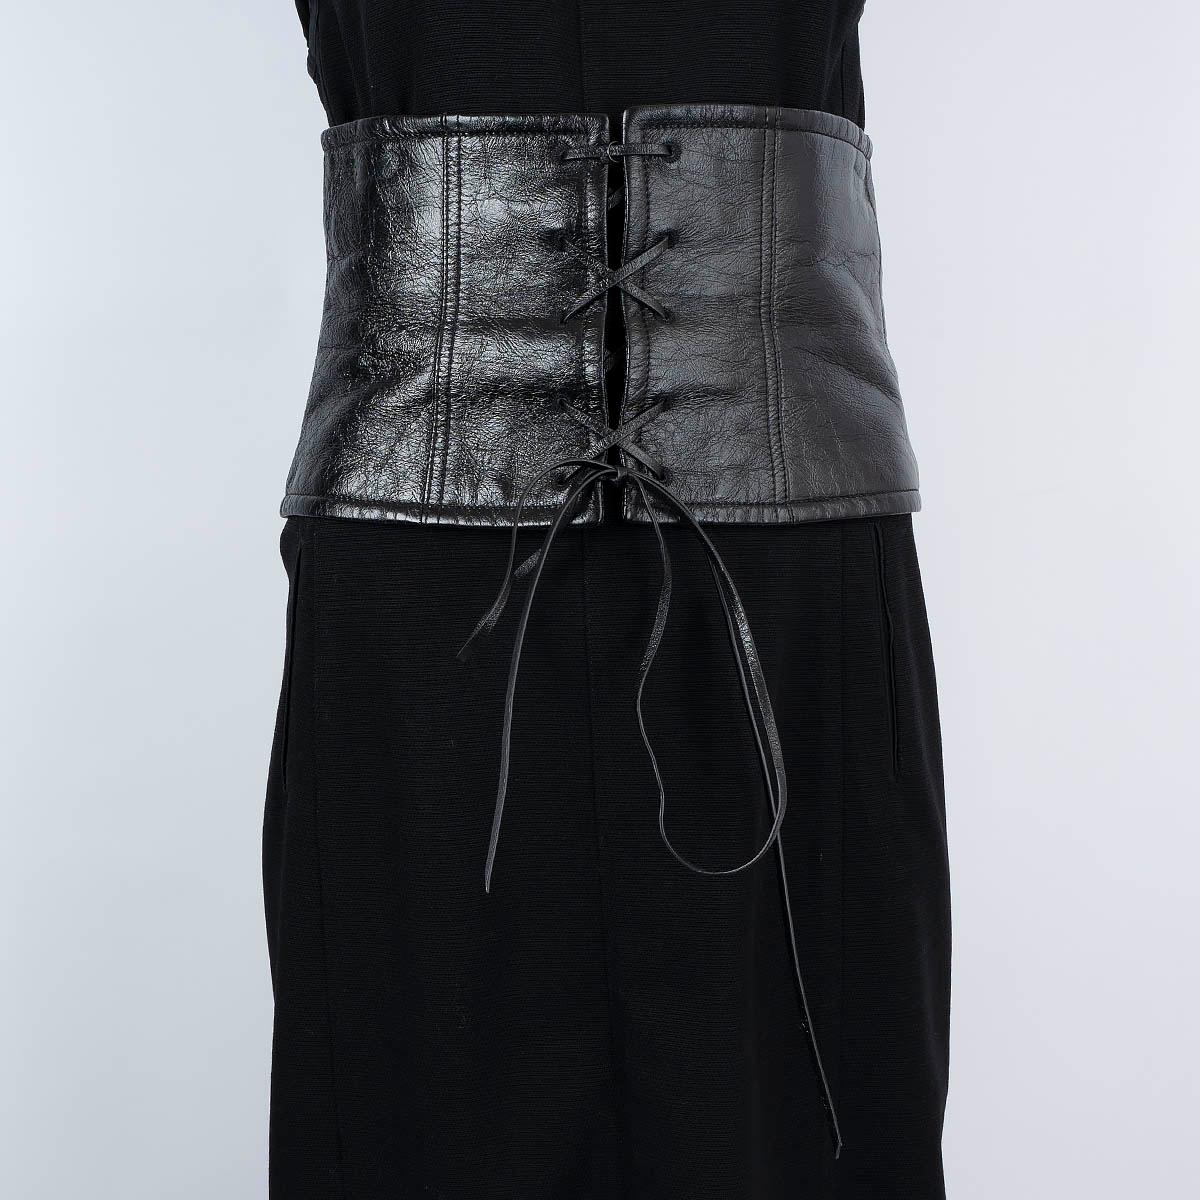 100% authentic Miu Miu waist belt in black lambskin leather with lace-up detail on the front. Closes with a zipper in the back and is lined in viscose (100%). Has been worn and is in excellent condition.

2019 Pre-Fall

Measurements
Width	20cm